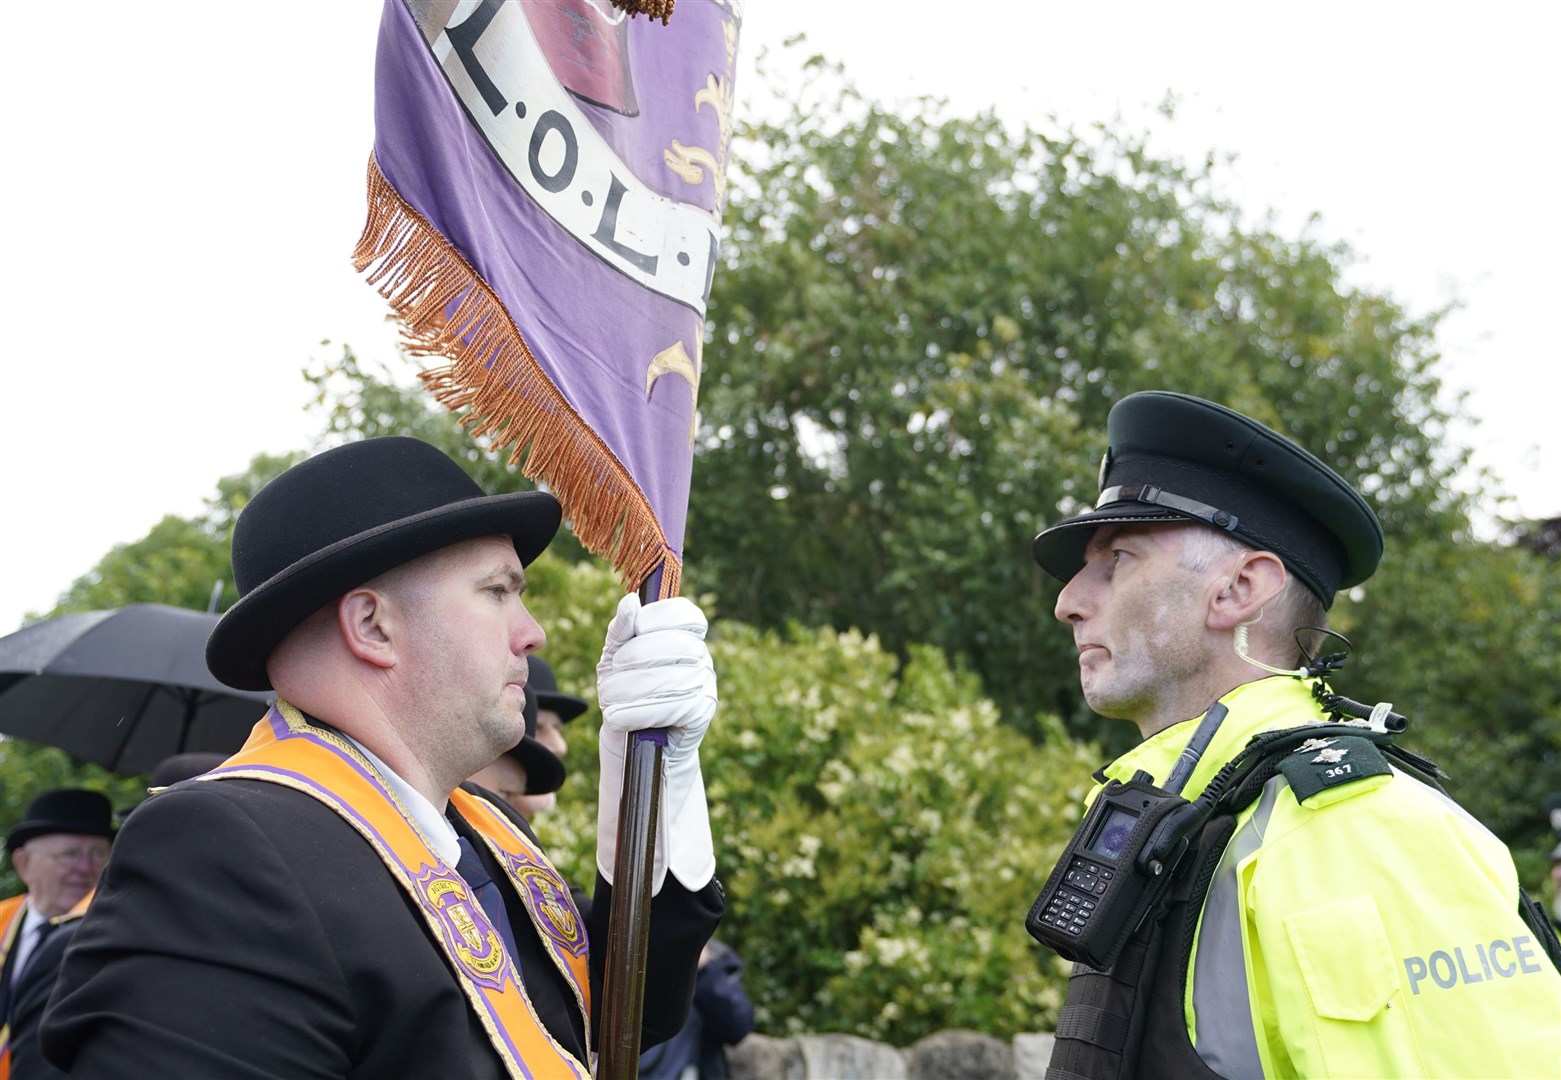 The Orange Order held a protest at the 25th anniversary Drumcree parade in Portadown, Co Armagh (Niall Carson/PA)